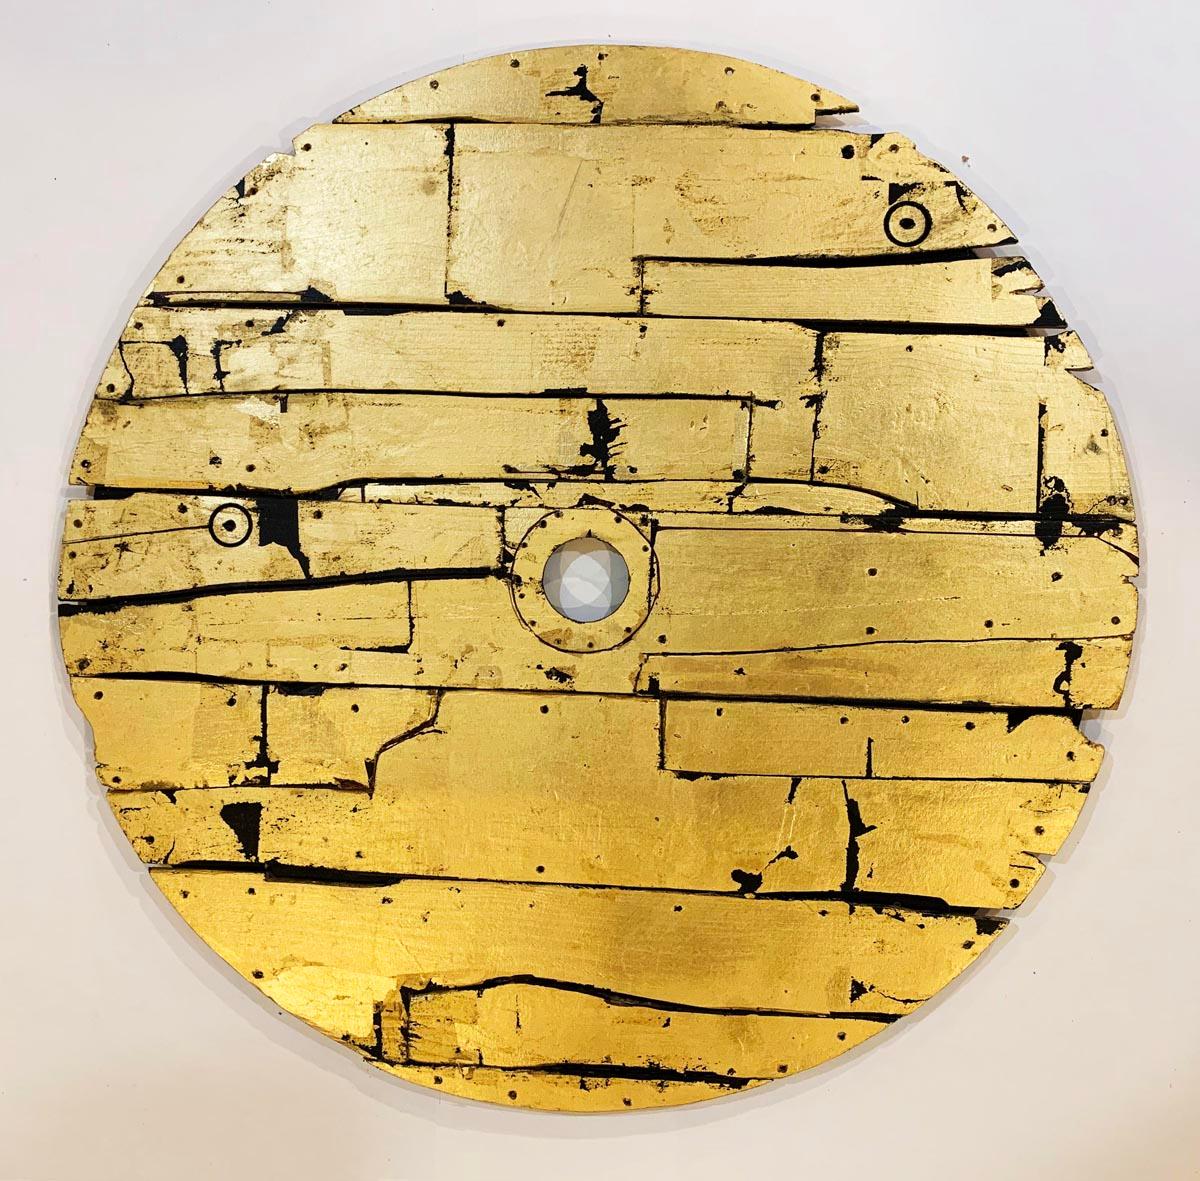 Russell Frampton Abstract Painting - Solinus Shield - Gold / Metal Leaf & Acrylic on Wood:  Magical-realism inspired